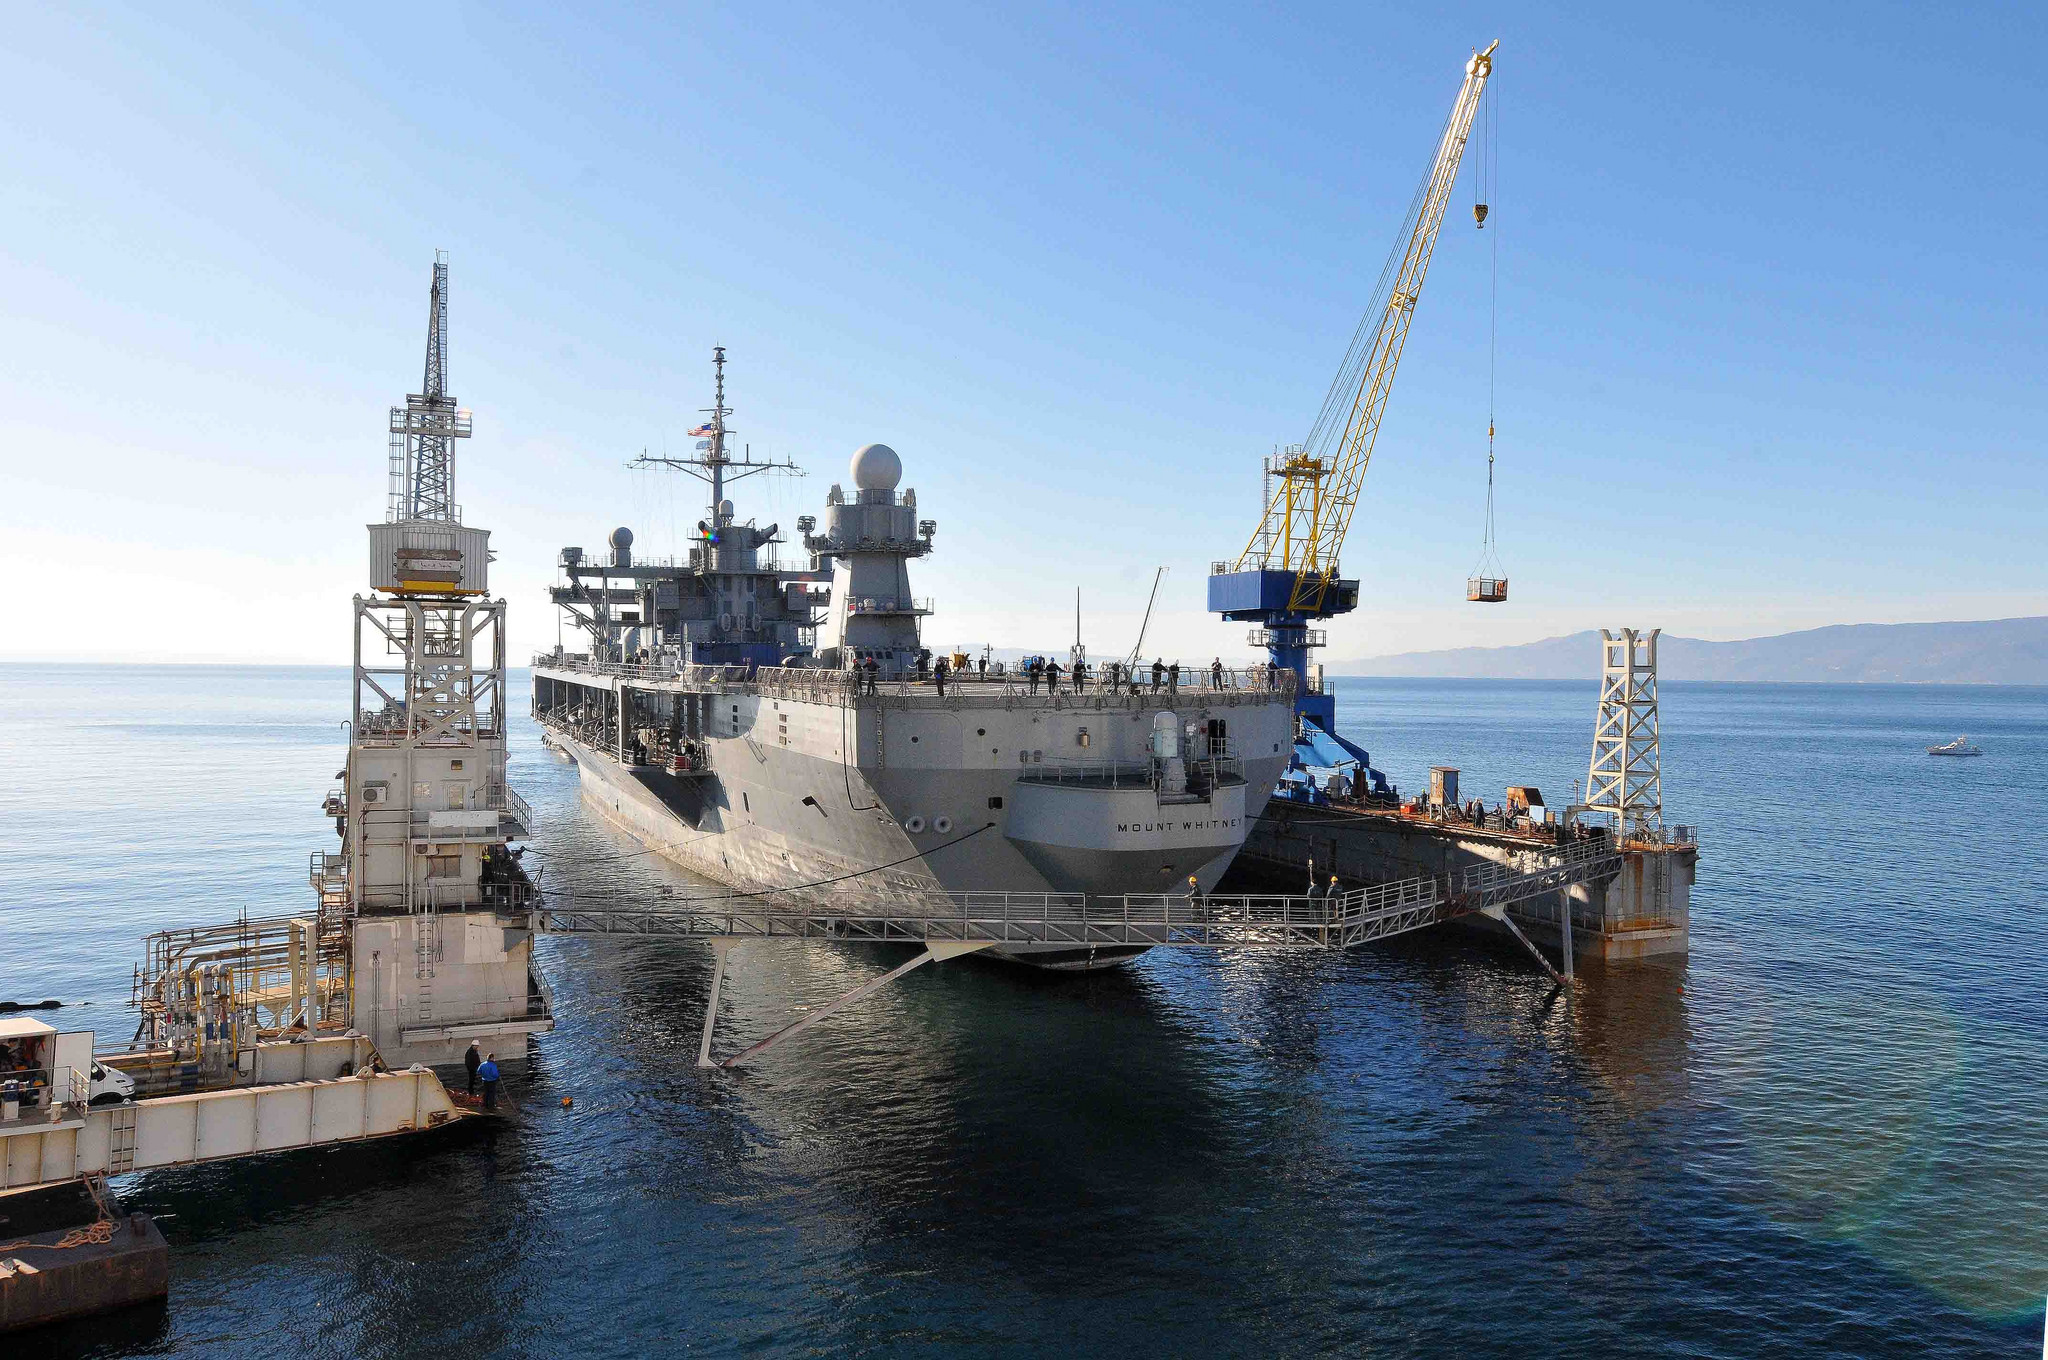 USS Mount Whitney (LCC20) is tugged in to the staging area to begin the dry dock process in the Viktor Lenac Shipyard in Rijeka, Croatia on Jan. 19, 2015. US Navy 